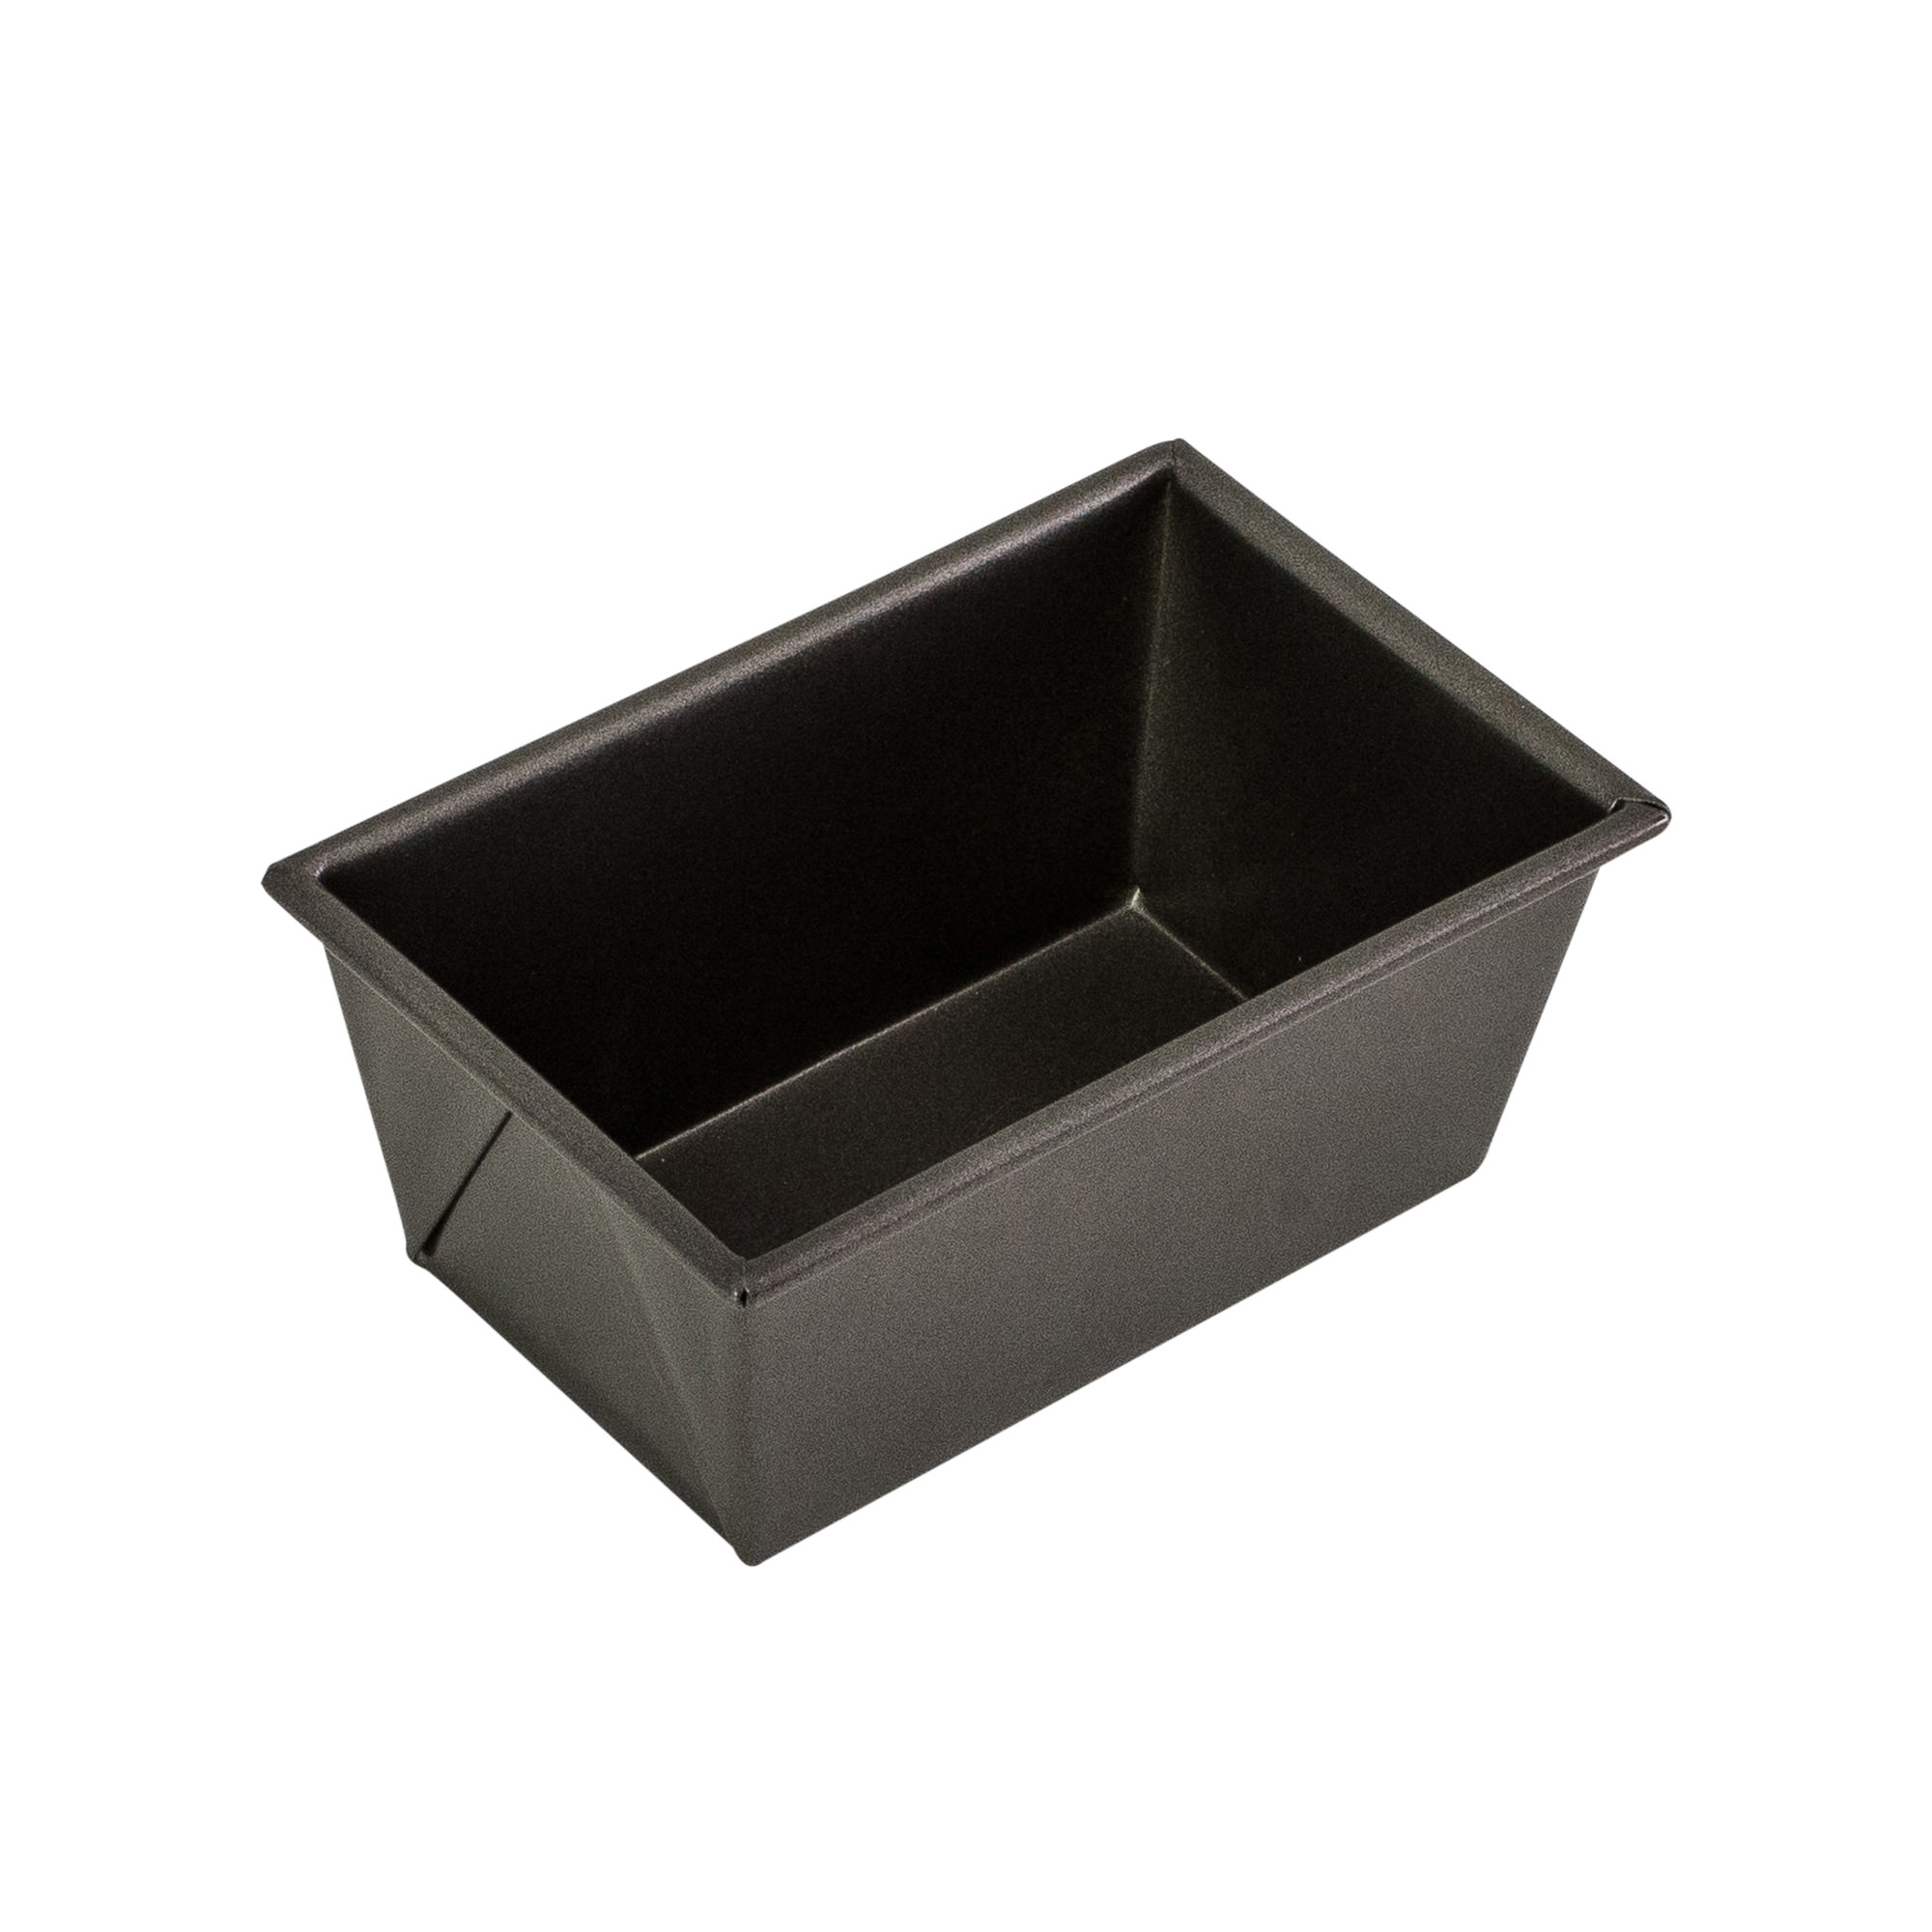 Bakemaster Non Stick Box Sided Loaf Pan 15x9cm Image 1